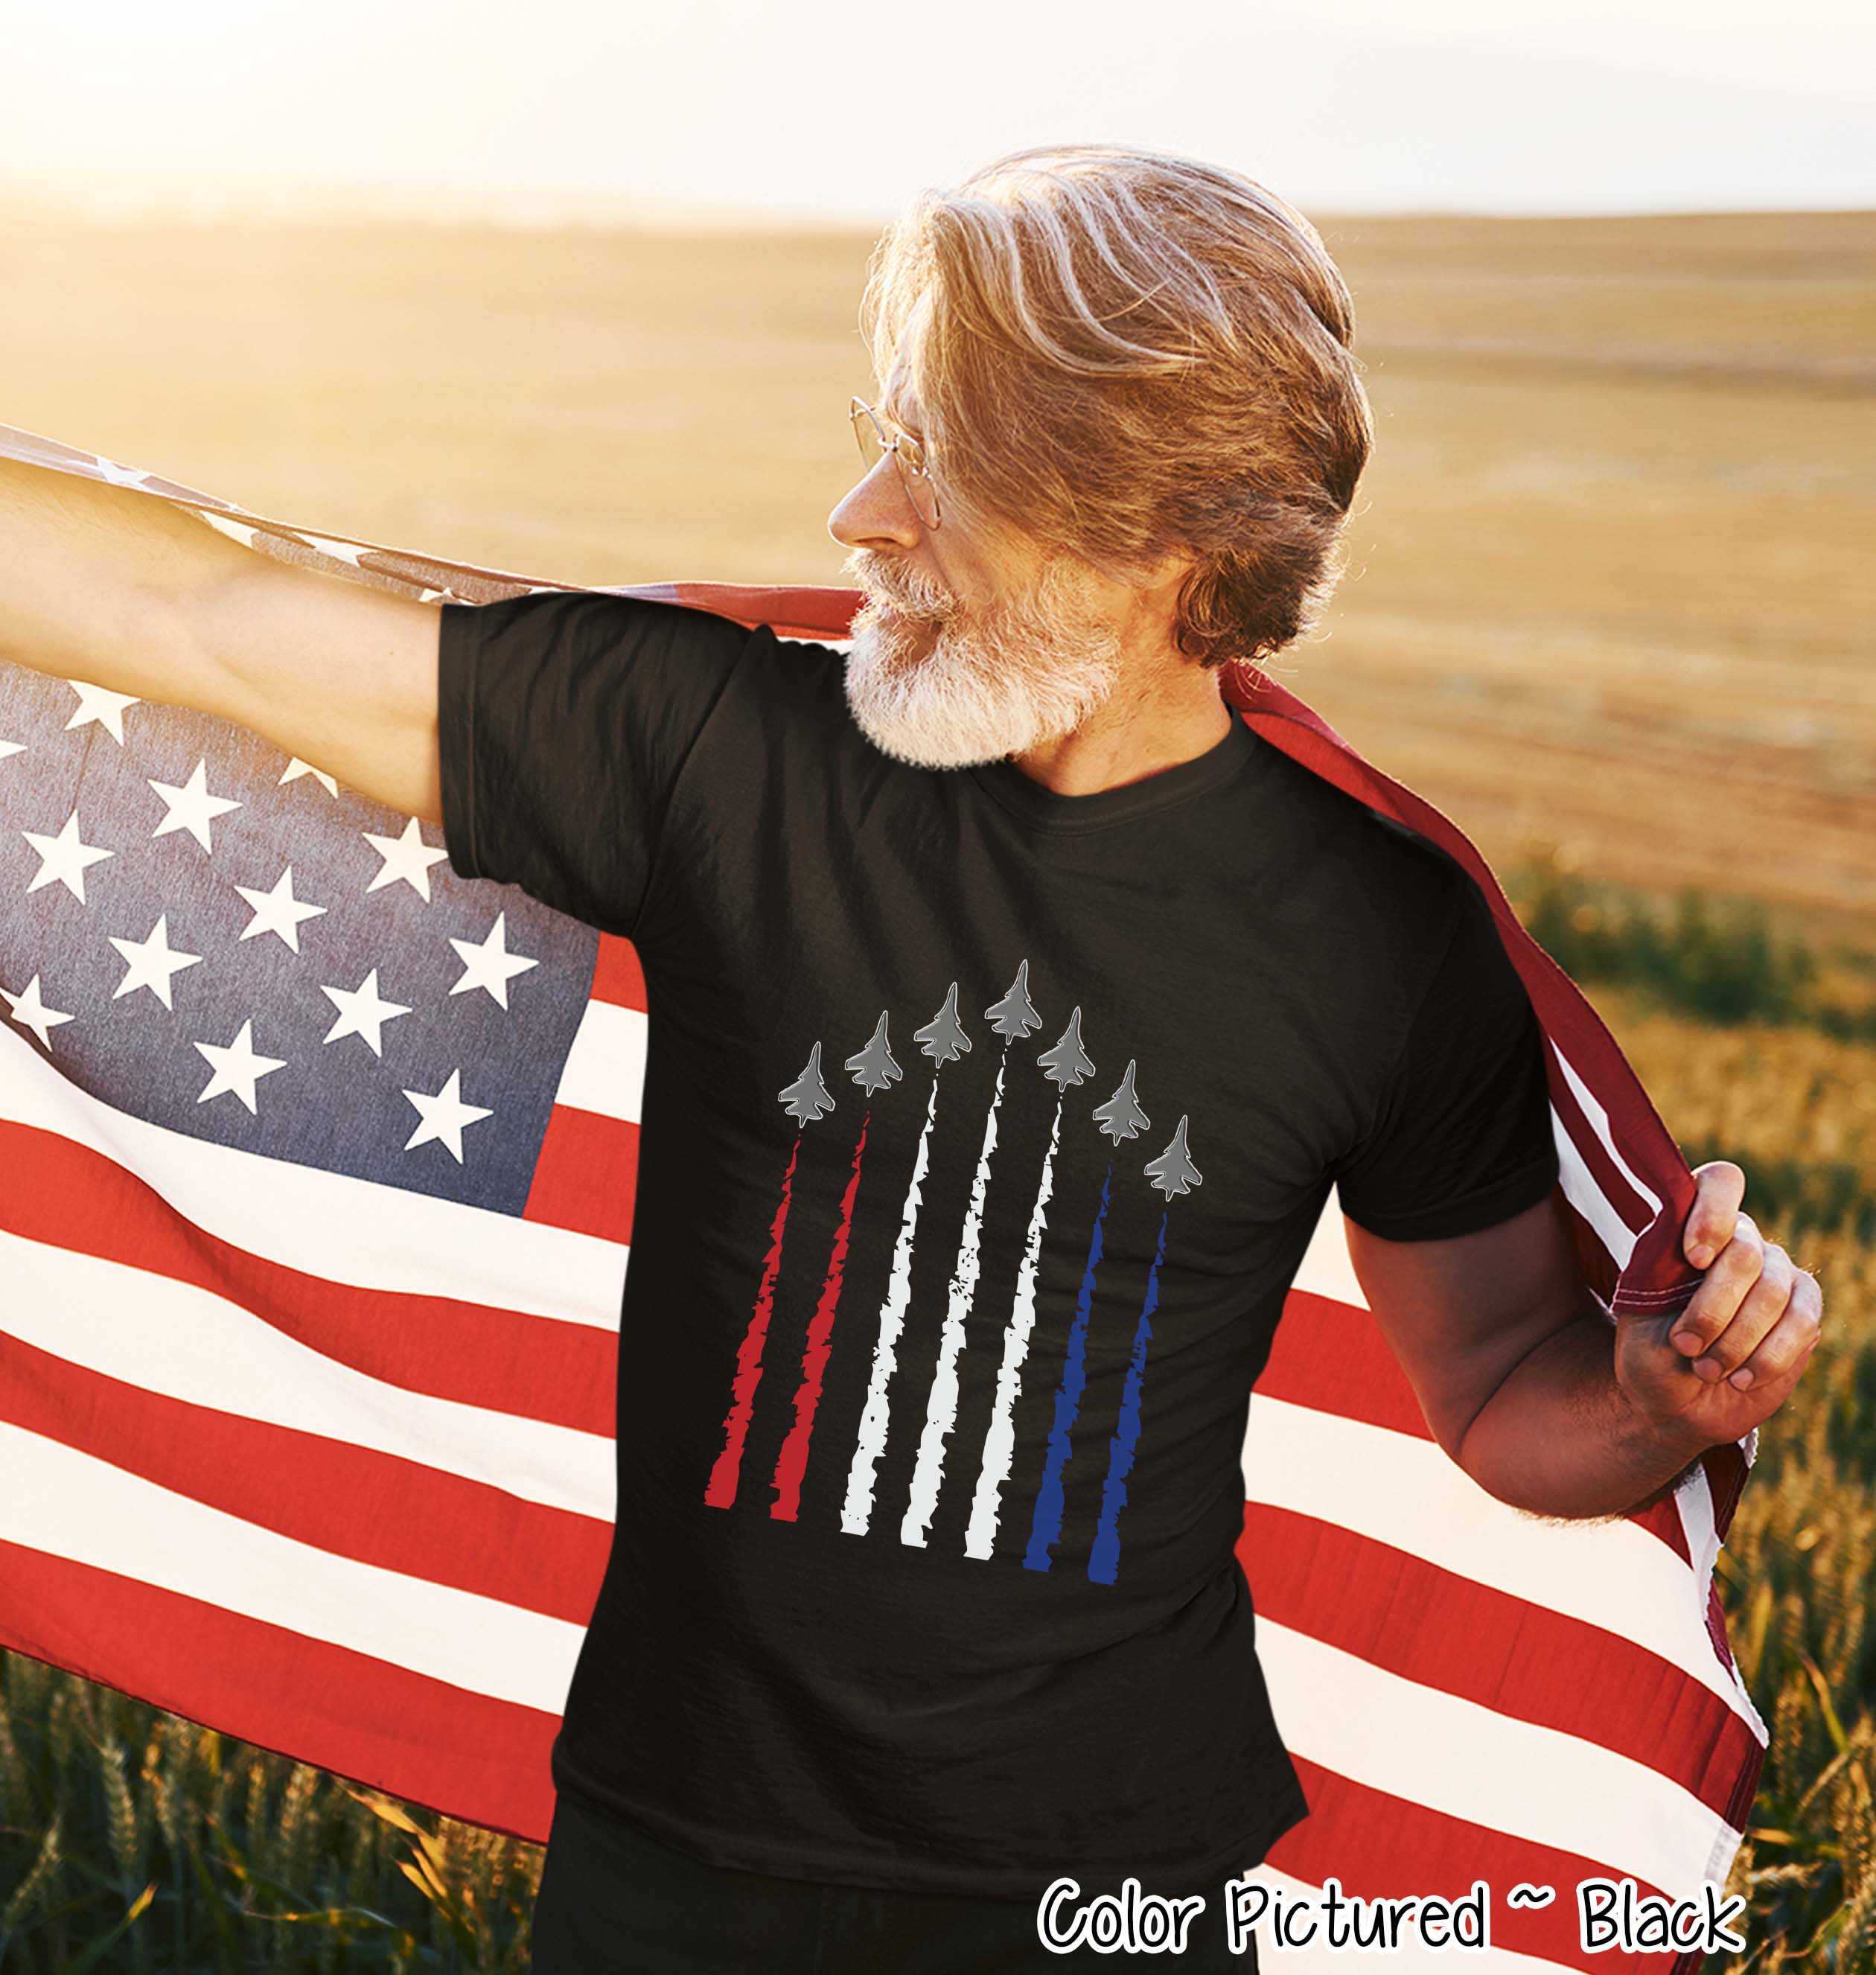 Jets with Patriotic Smoke Trails Tee